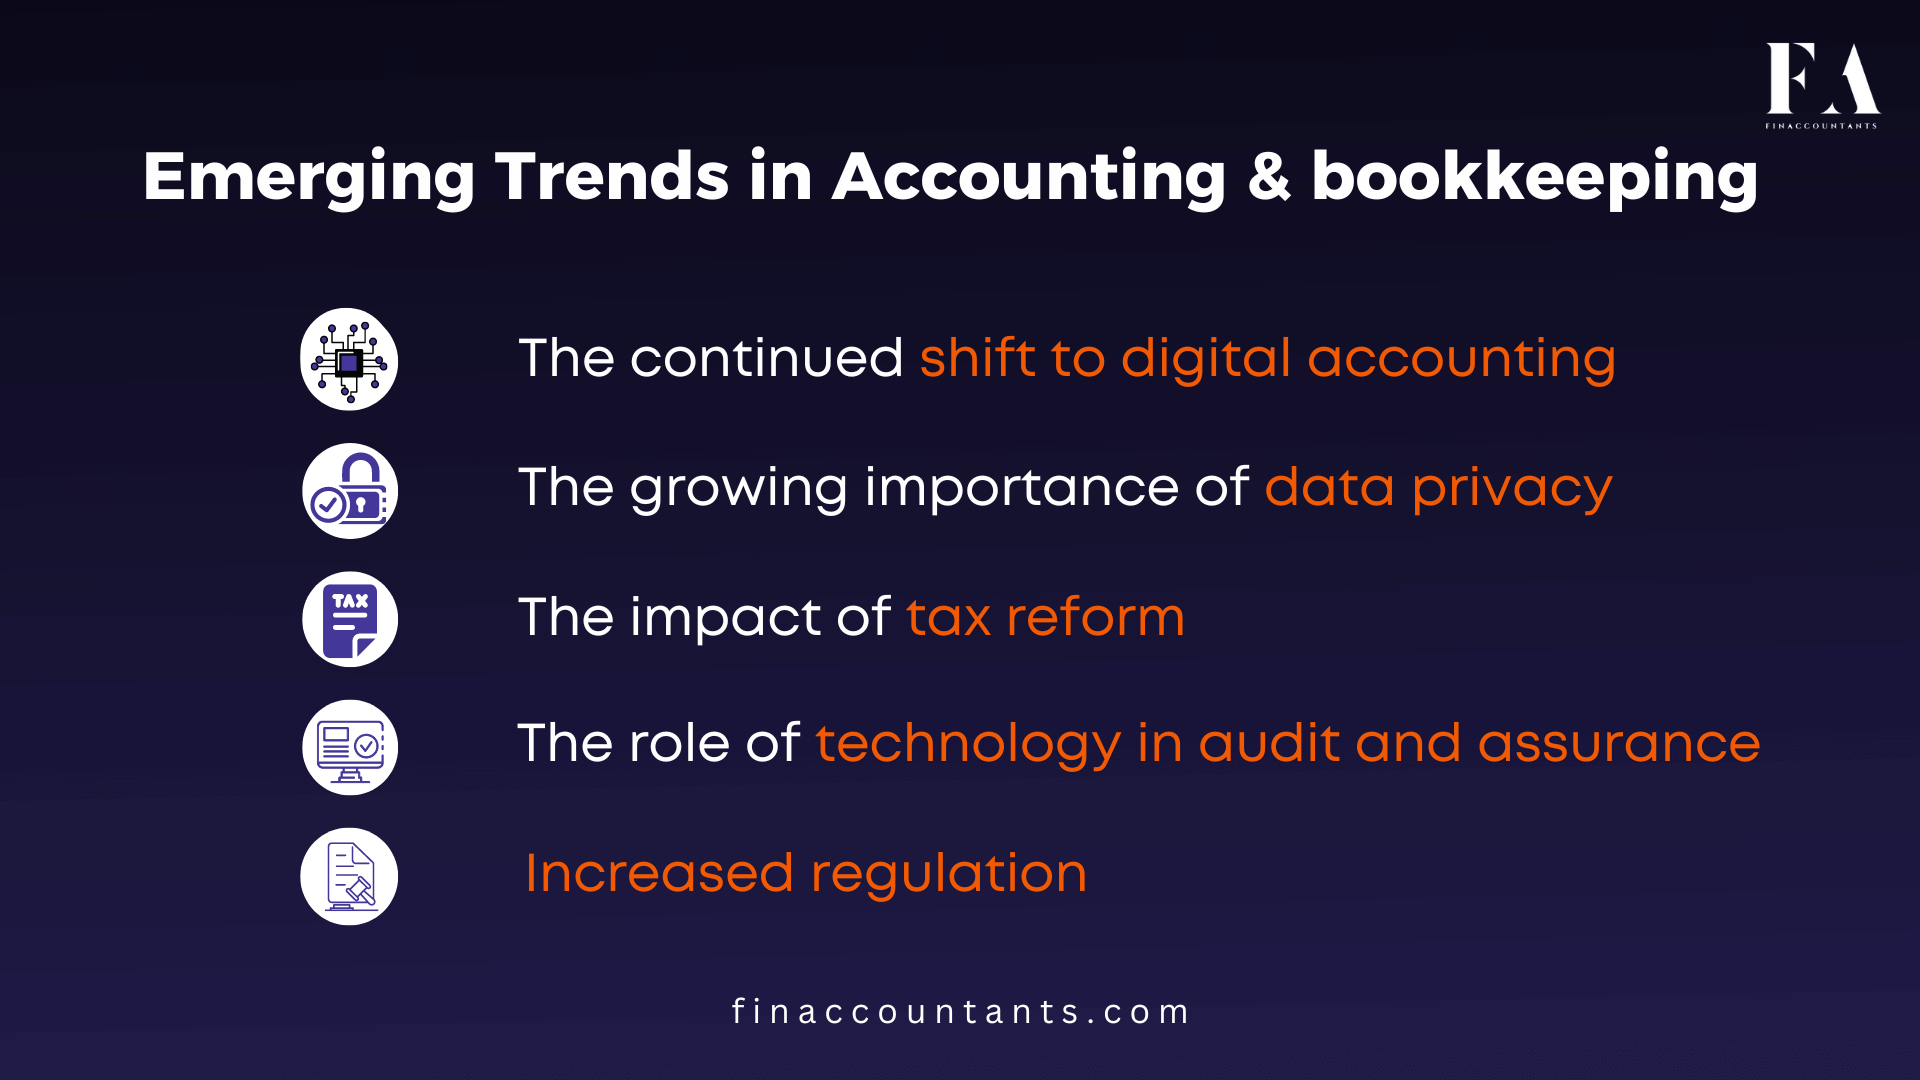 Accounting-trends-2023